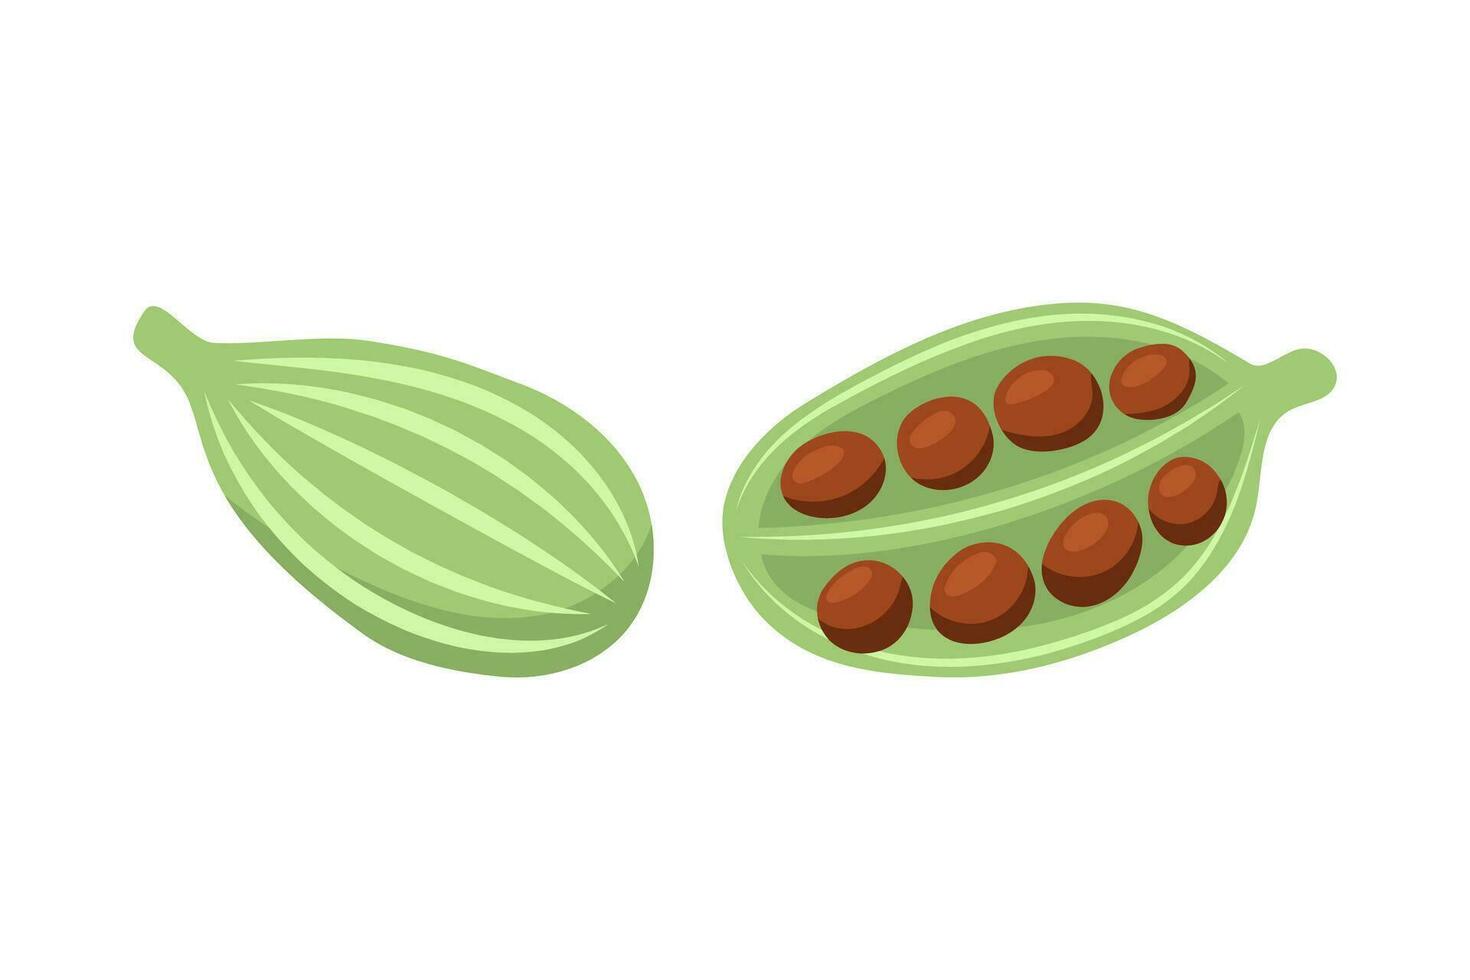 Cardamom seeds on a white background. Isolated vector illustration